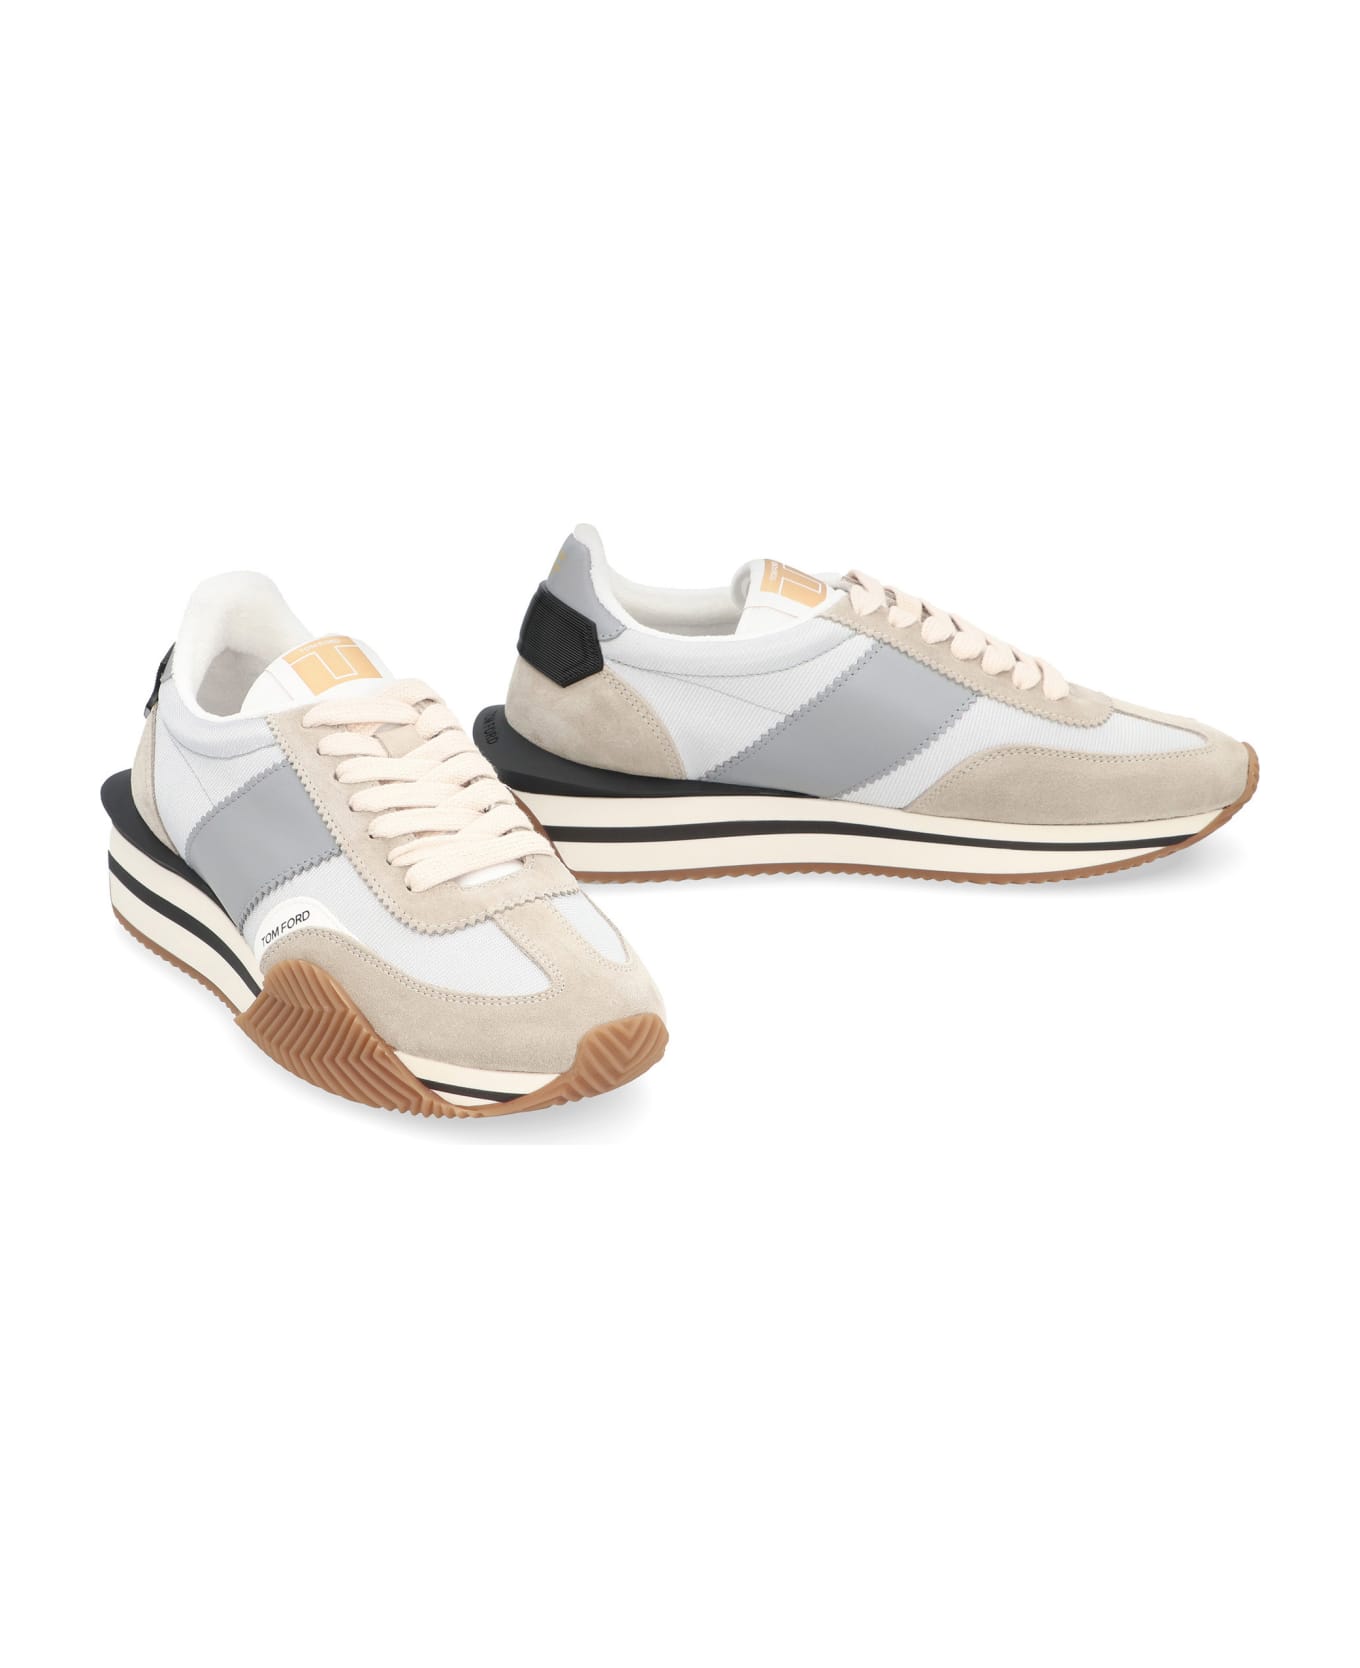 Tom Ford James Low-top Sneakers - Grey スニーカー